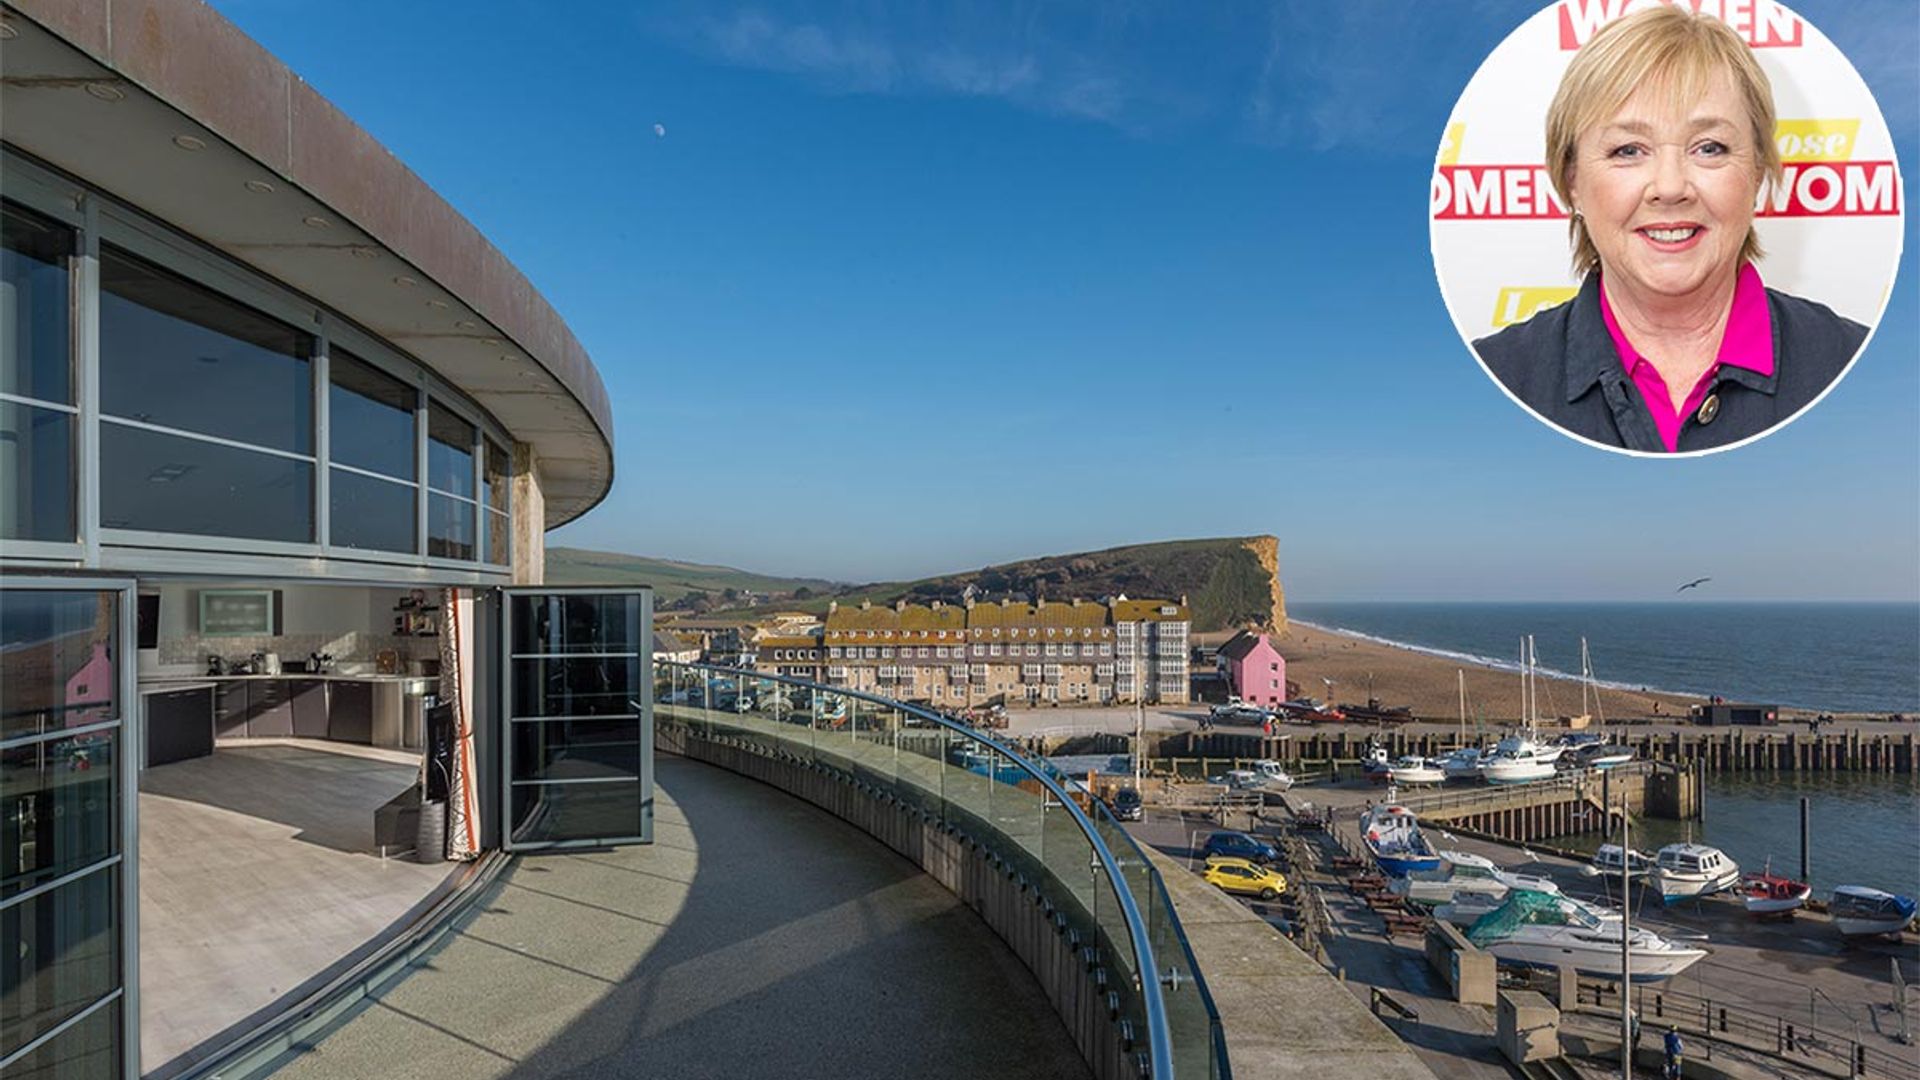 Broadchurch star Pauline Quirke's amazing beachfront penthouse is up for sale – take a look inside